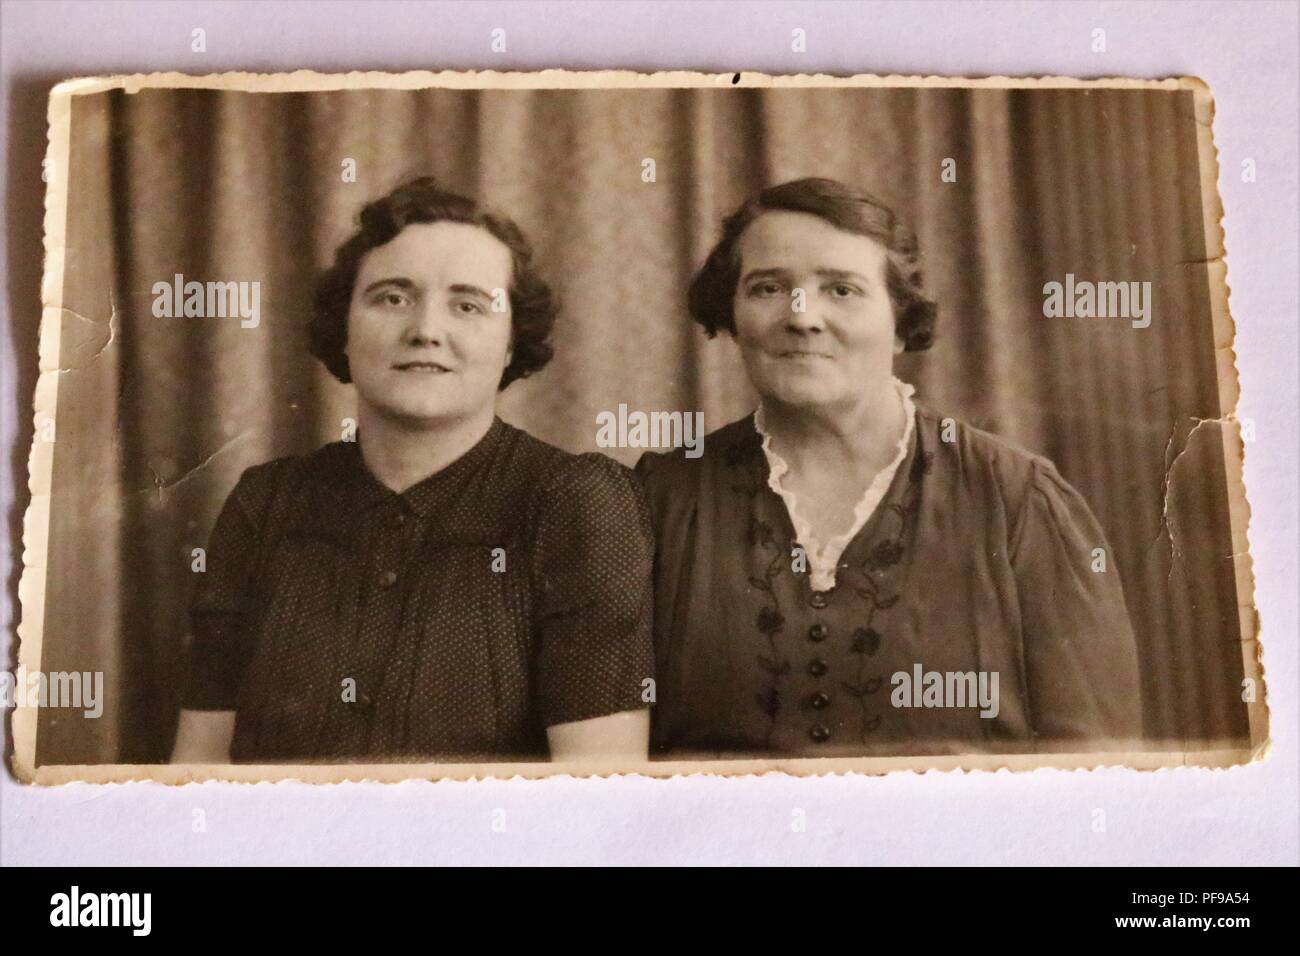 Social History - Black and white old photograph showing two women posing for portrait - 1930s / 1940s Stock Photo